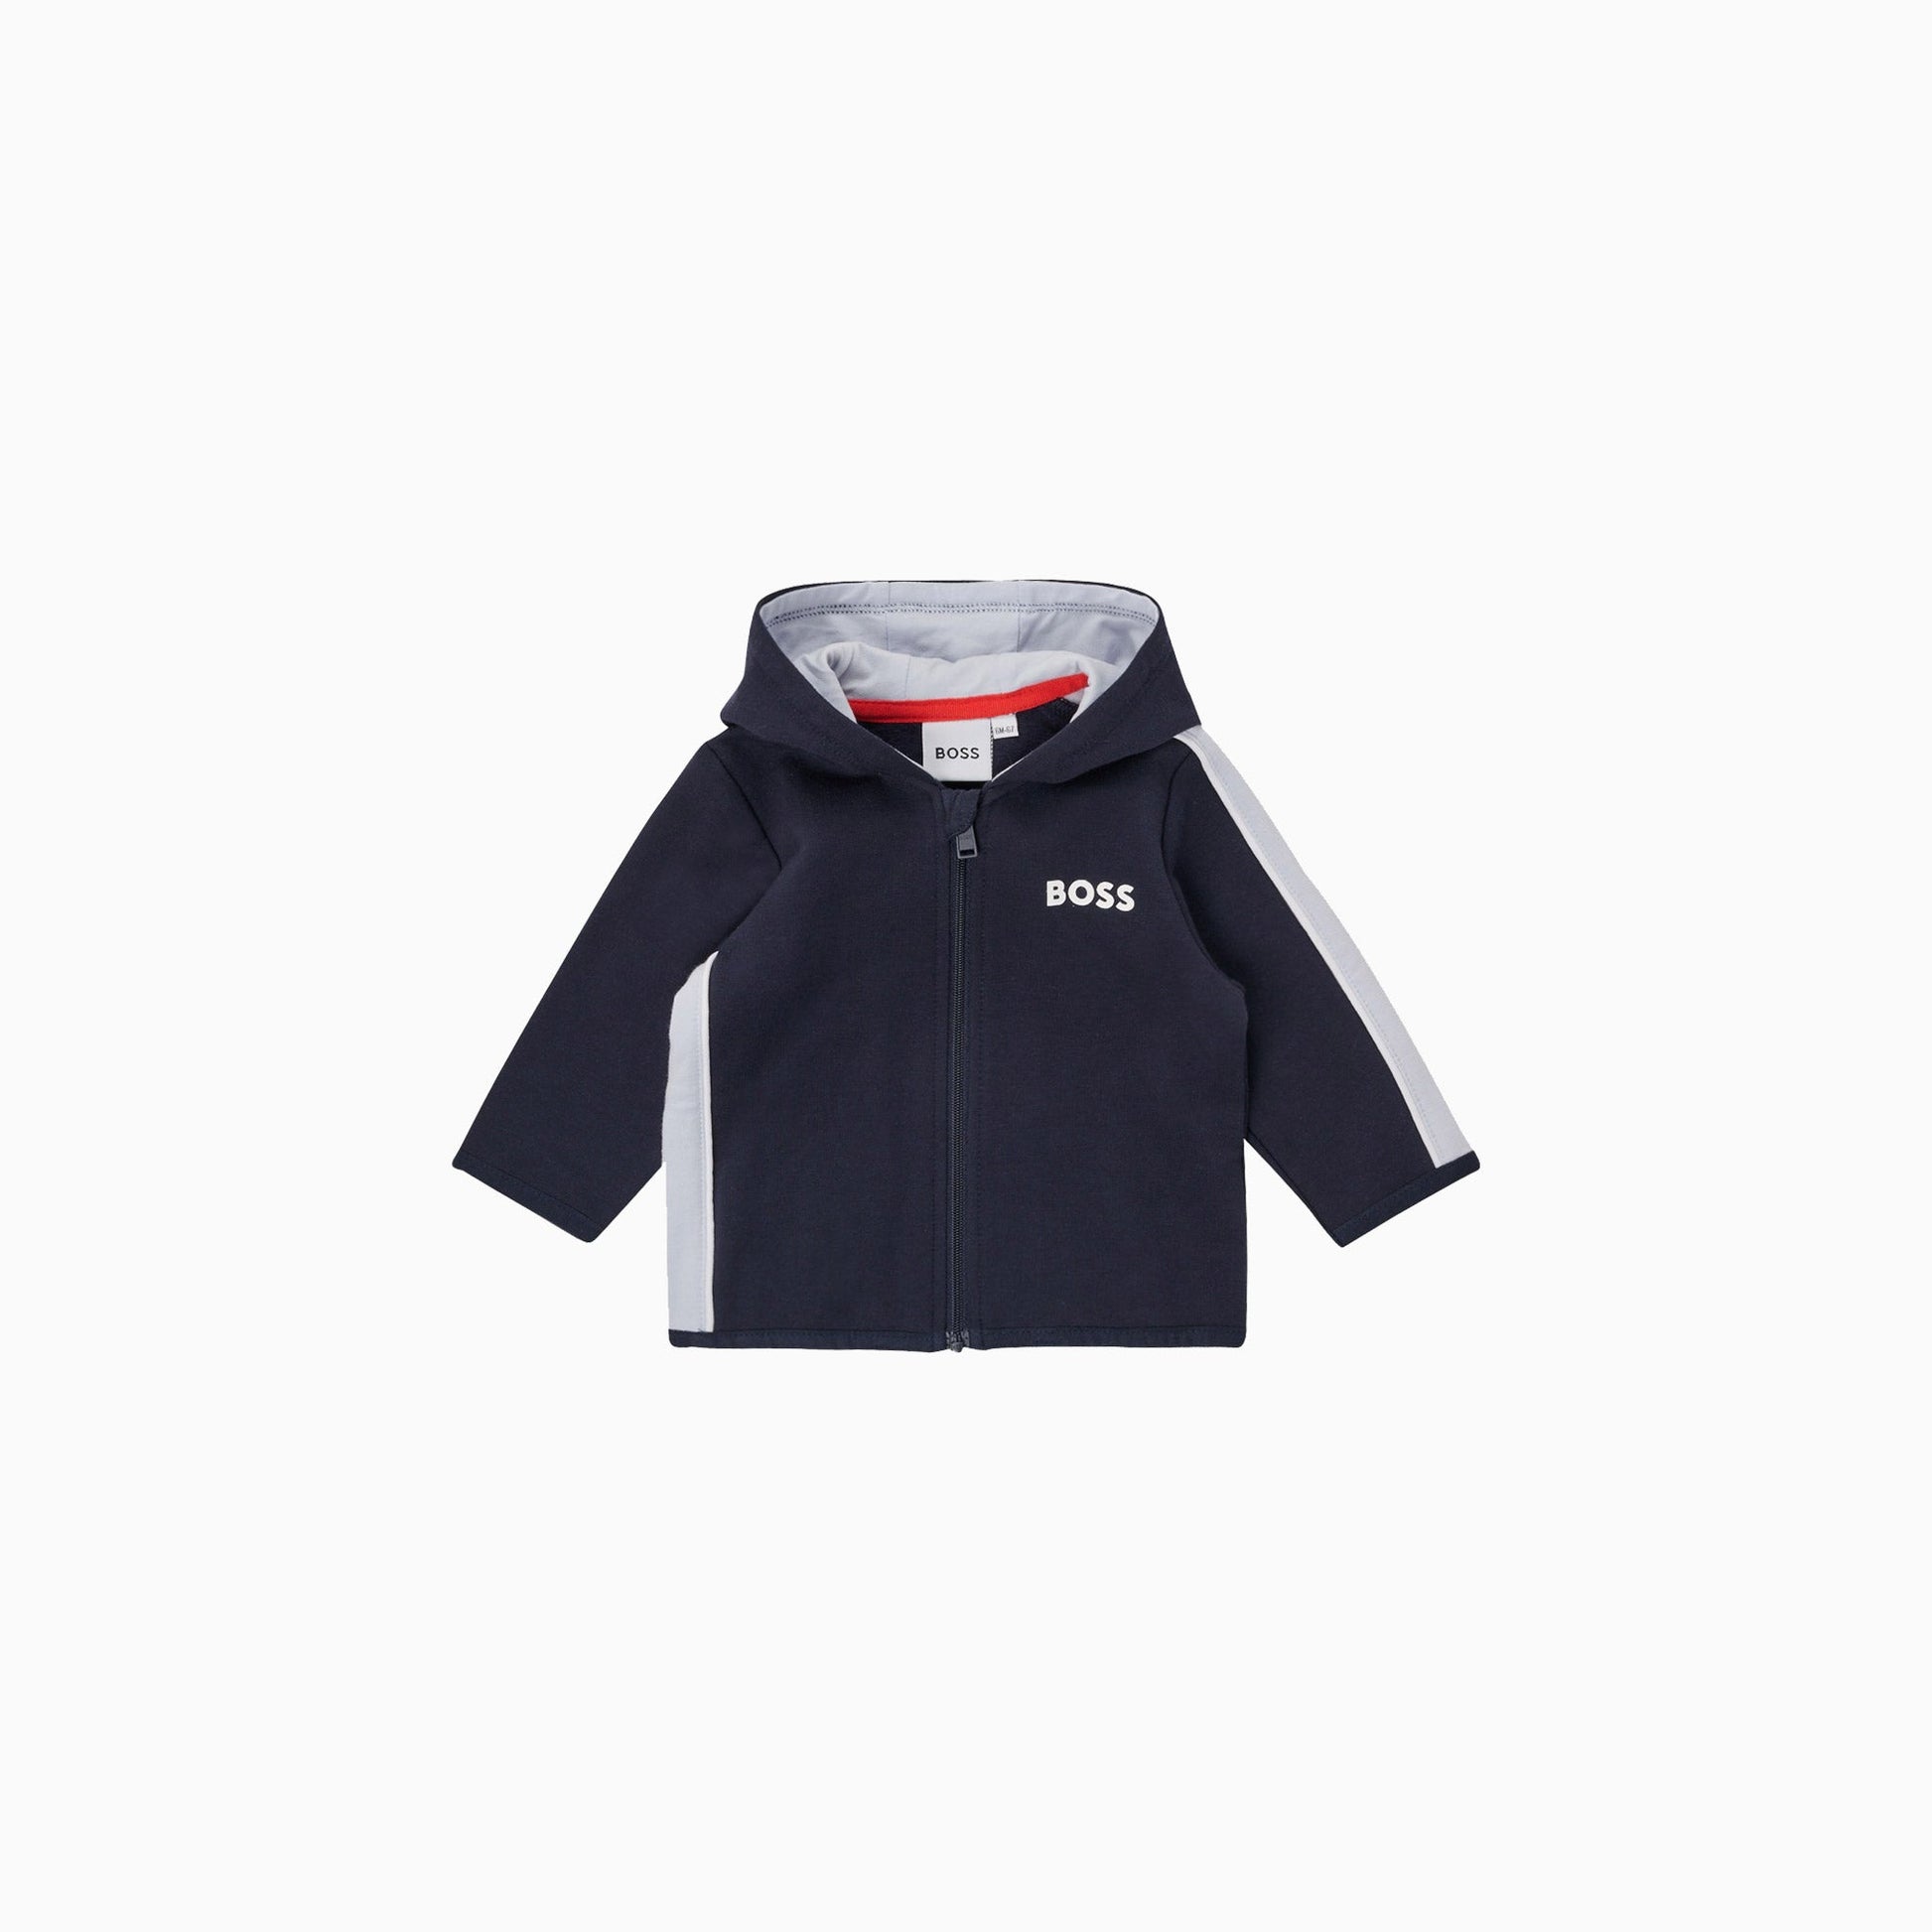 Hugo Boss Kid's 2 Piece Outfit Infants - Color: Navy - Kids Premium Clothing -